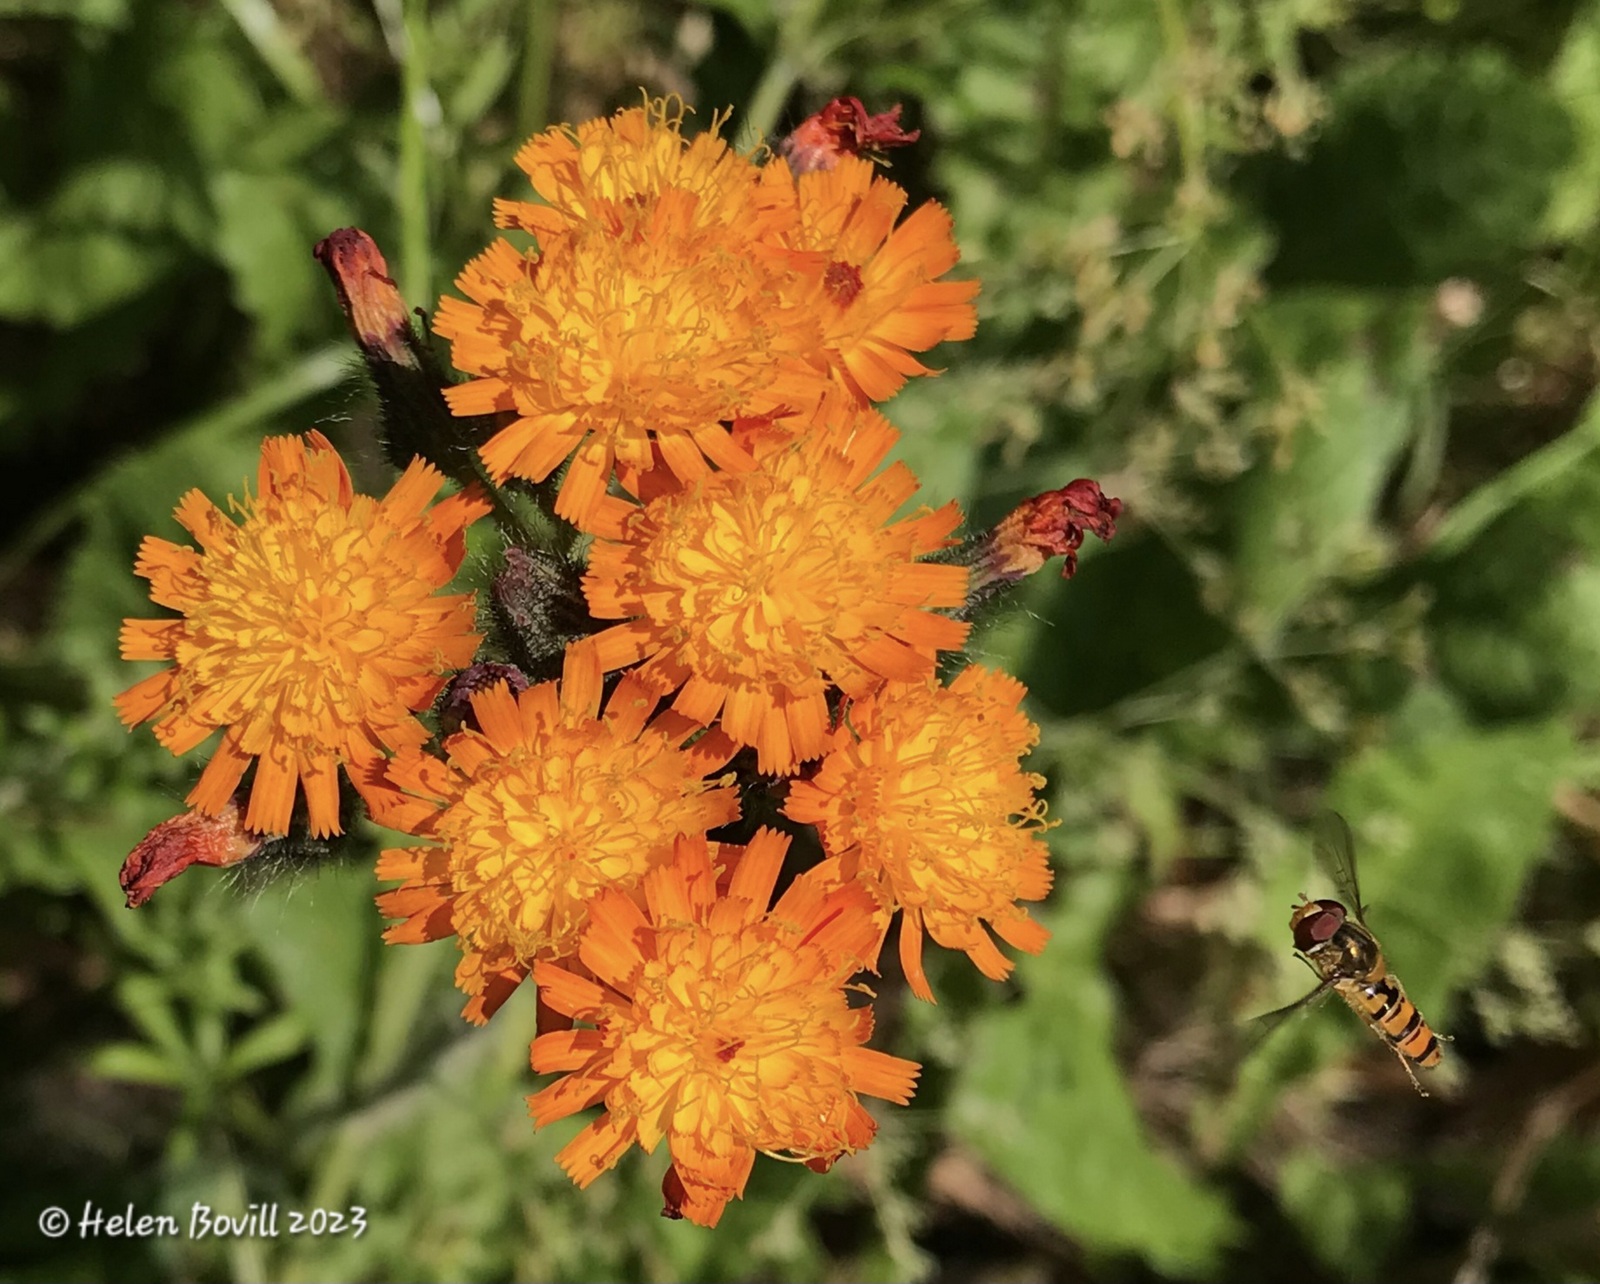 Fox-and-cubs plant with a Marmalade hoverfly approaching it